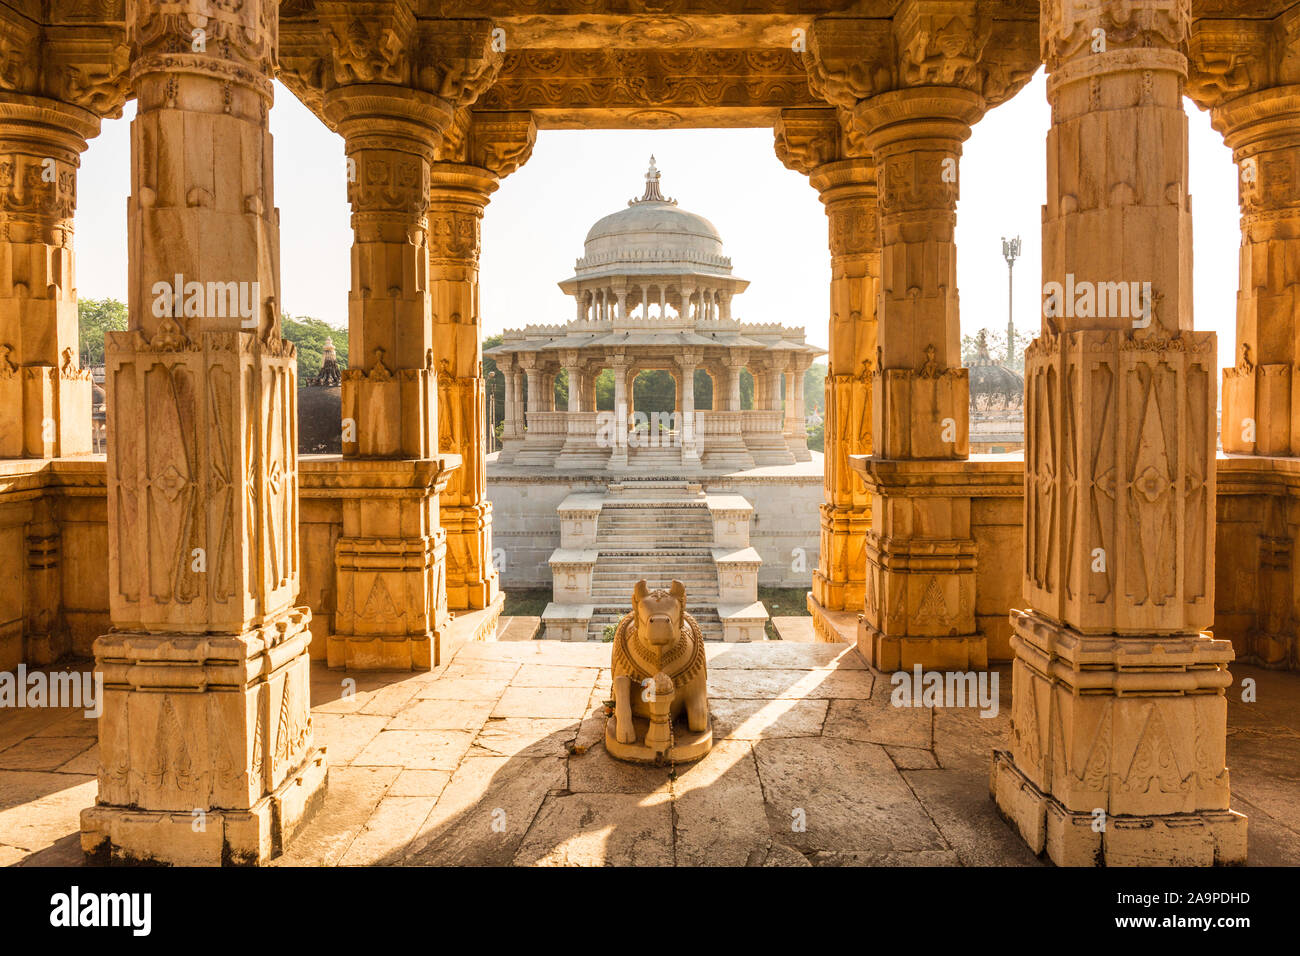 Inside of a temple at sunrise in India Udaipur Stock Photo